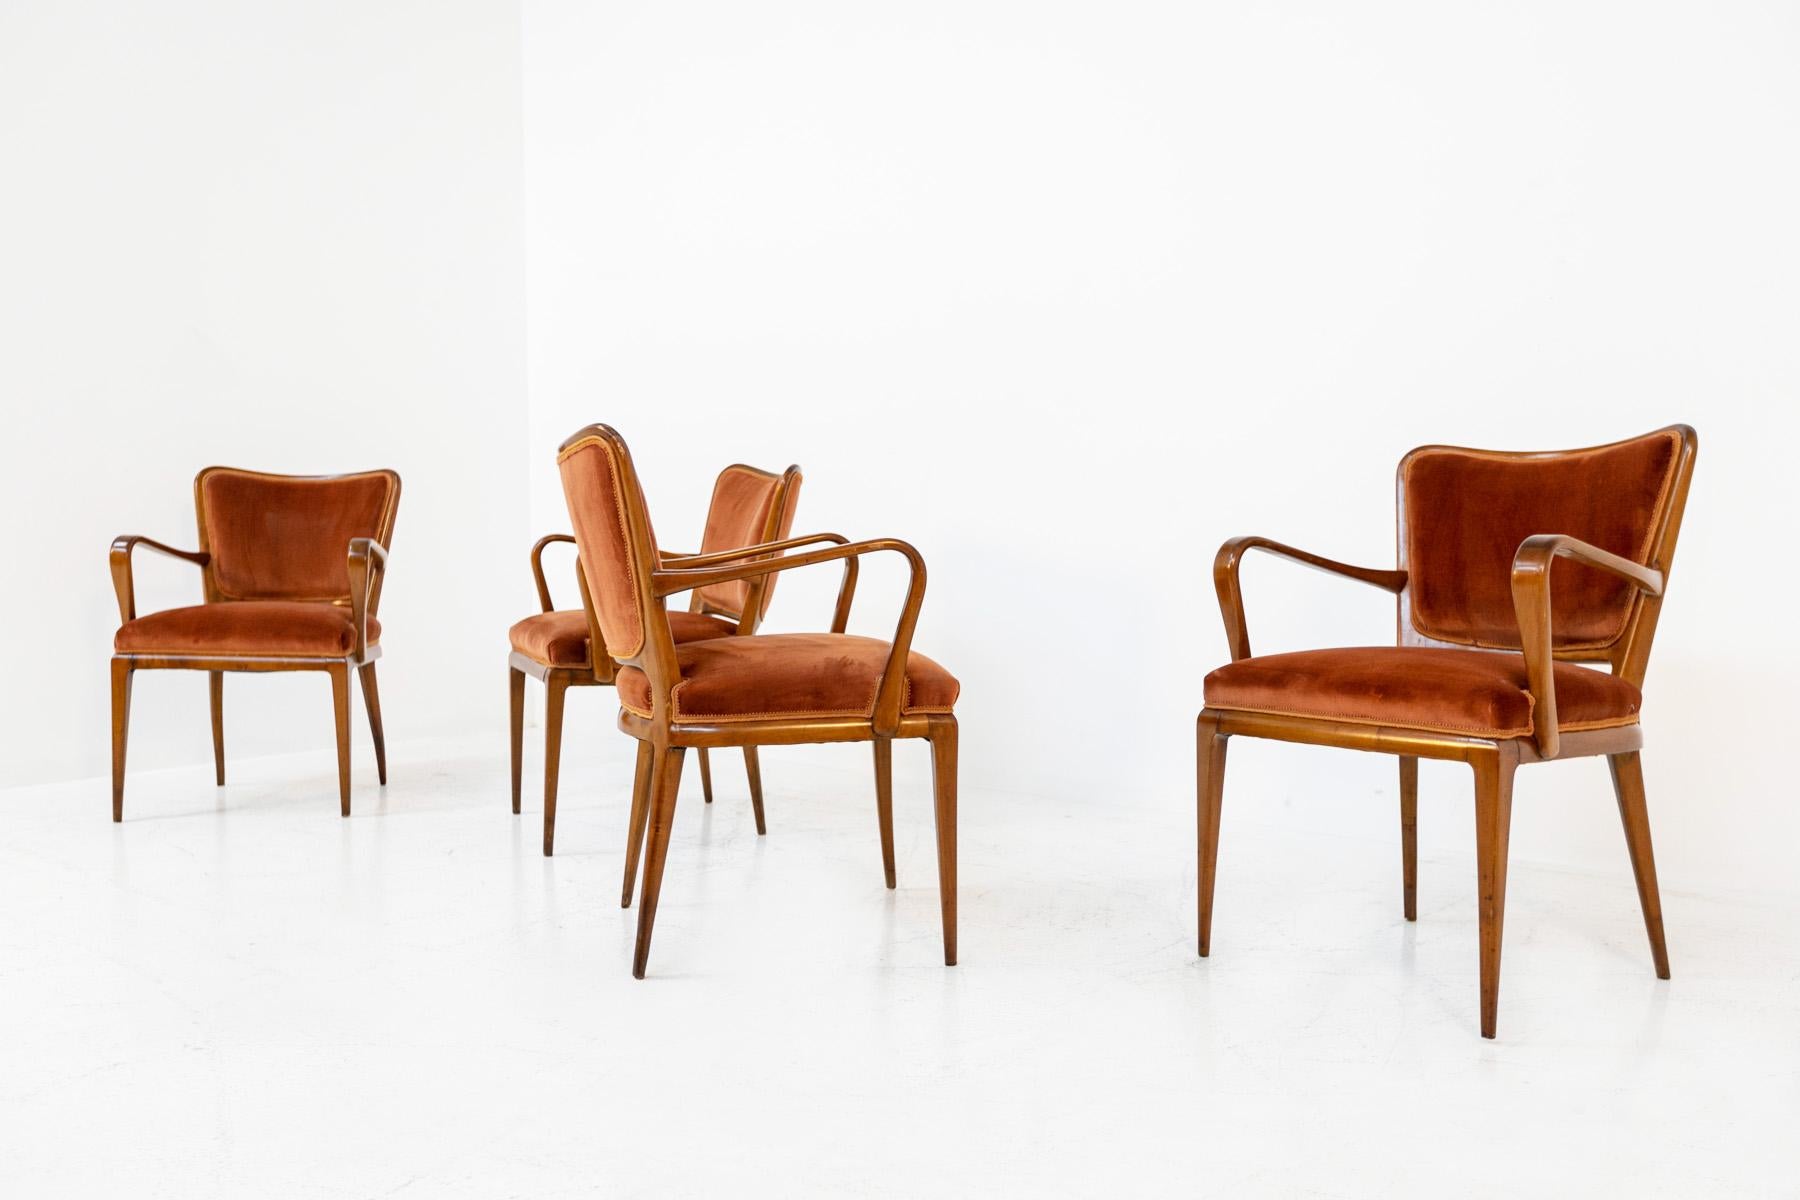 Elegant set of four Italian armchairs by Osvaldo Borsani for ABV from the 1950s. The armchairs are the 5700 model and were first designed for the Caminada and Leuthold house. The simple, sleek lines are striking from its modernity that is closer to